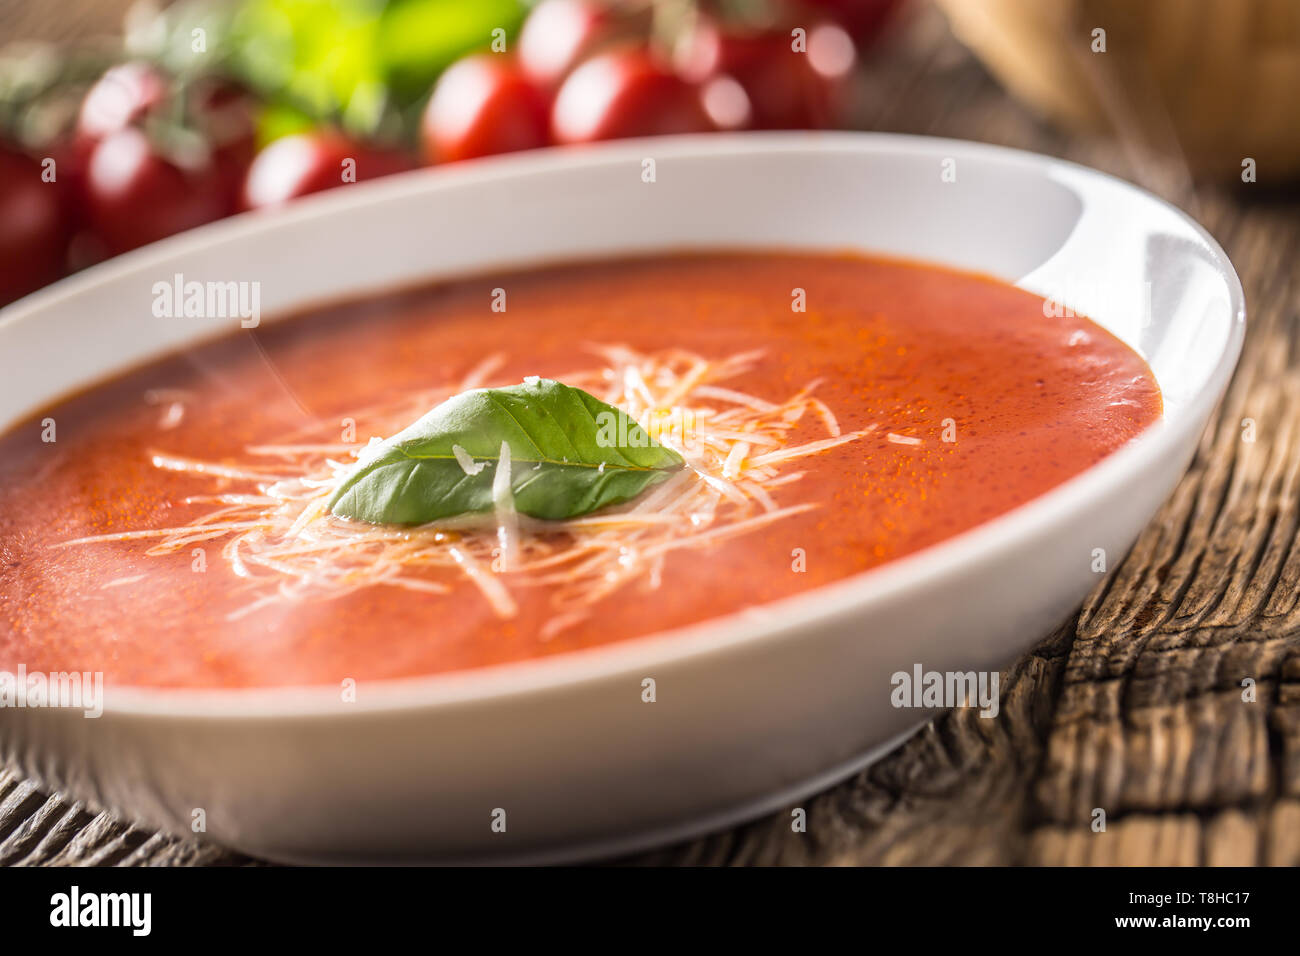 Hot tomato soup parmesan cheese and basil leave on old oal table Stock Photo